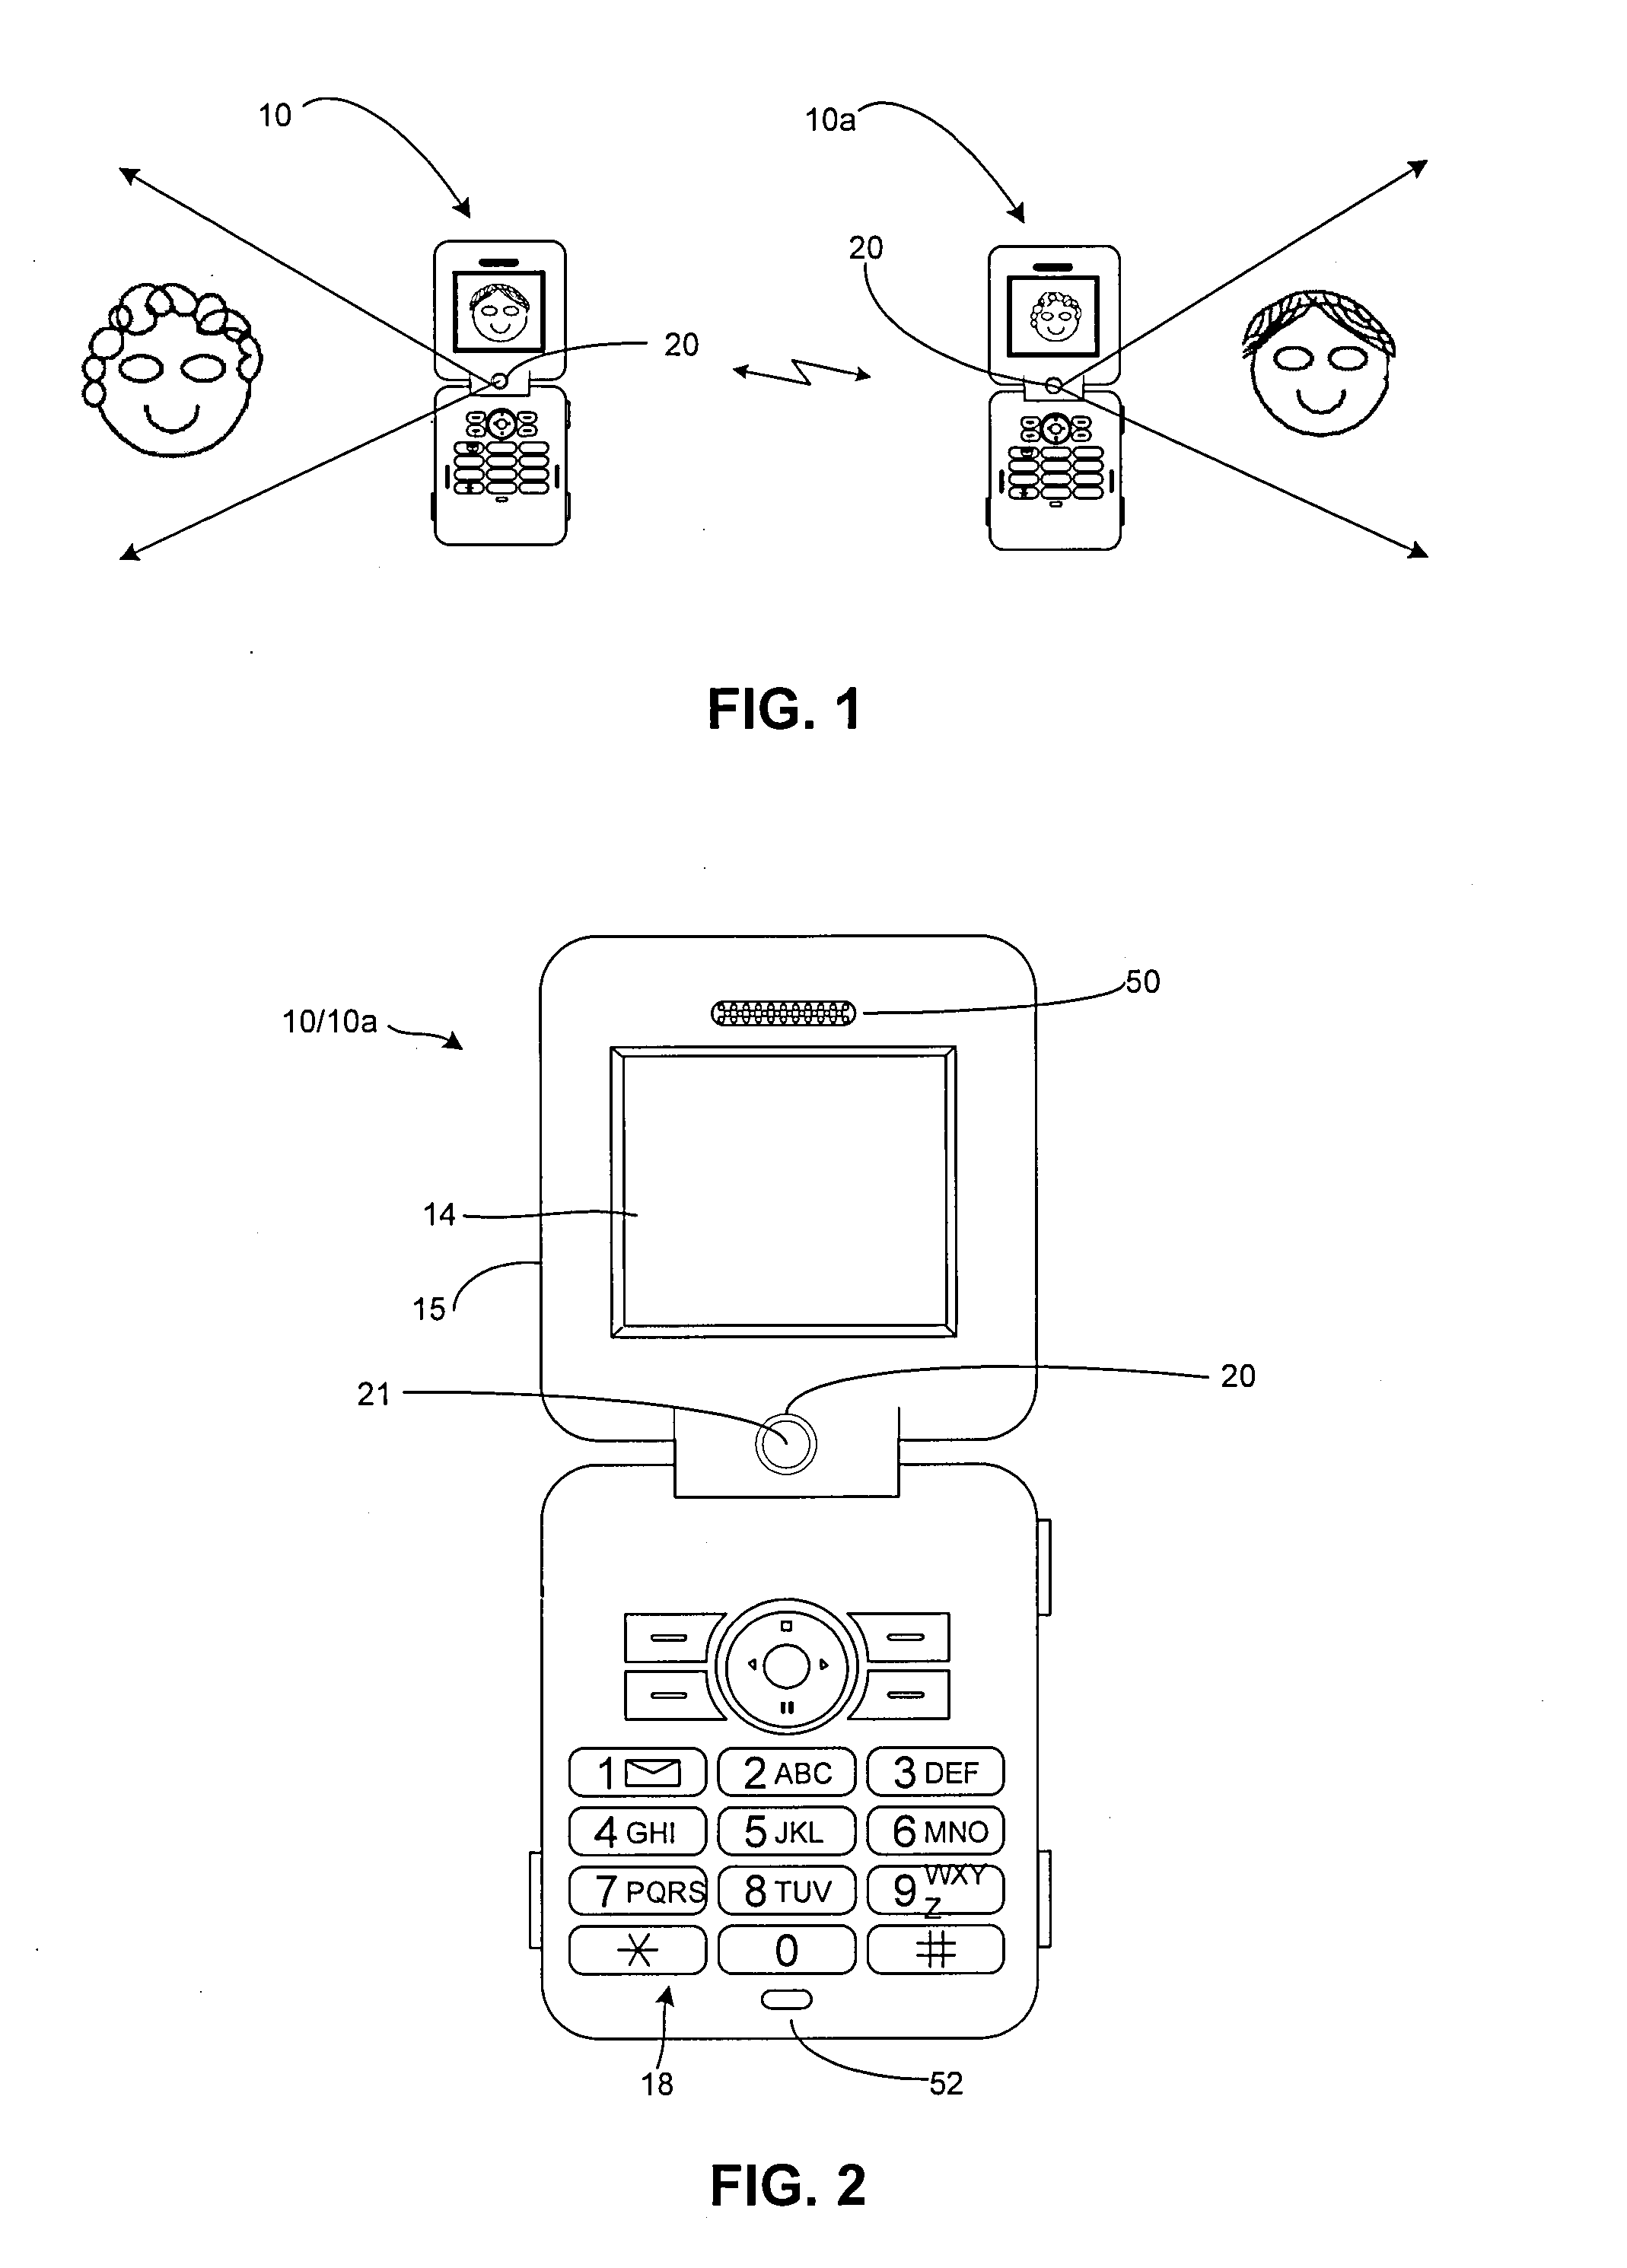 System and method for video telephony by converting facial motion to text